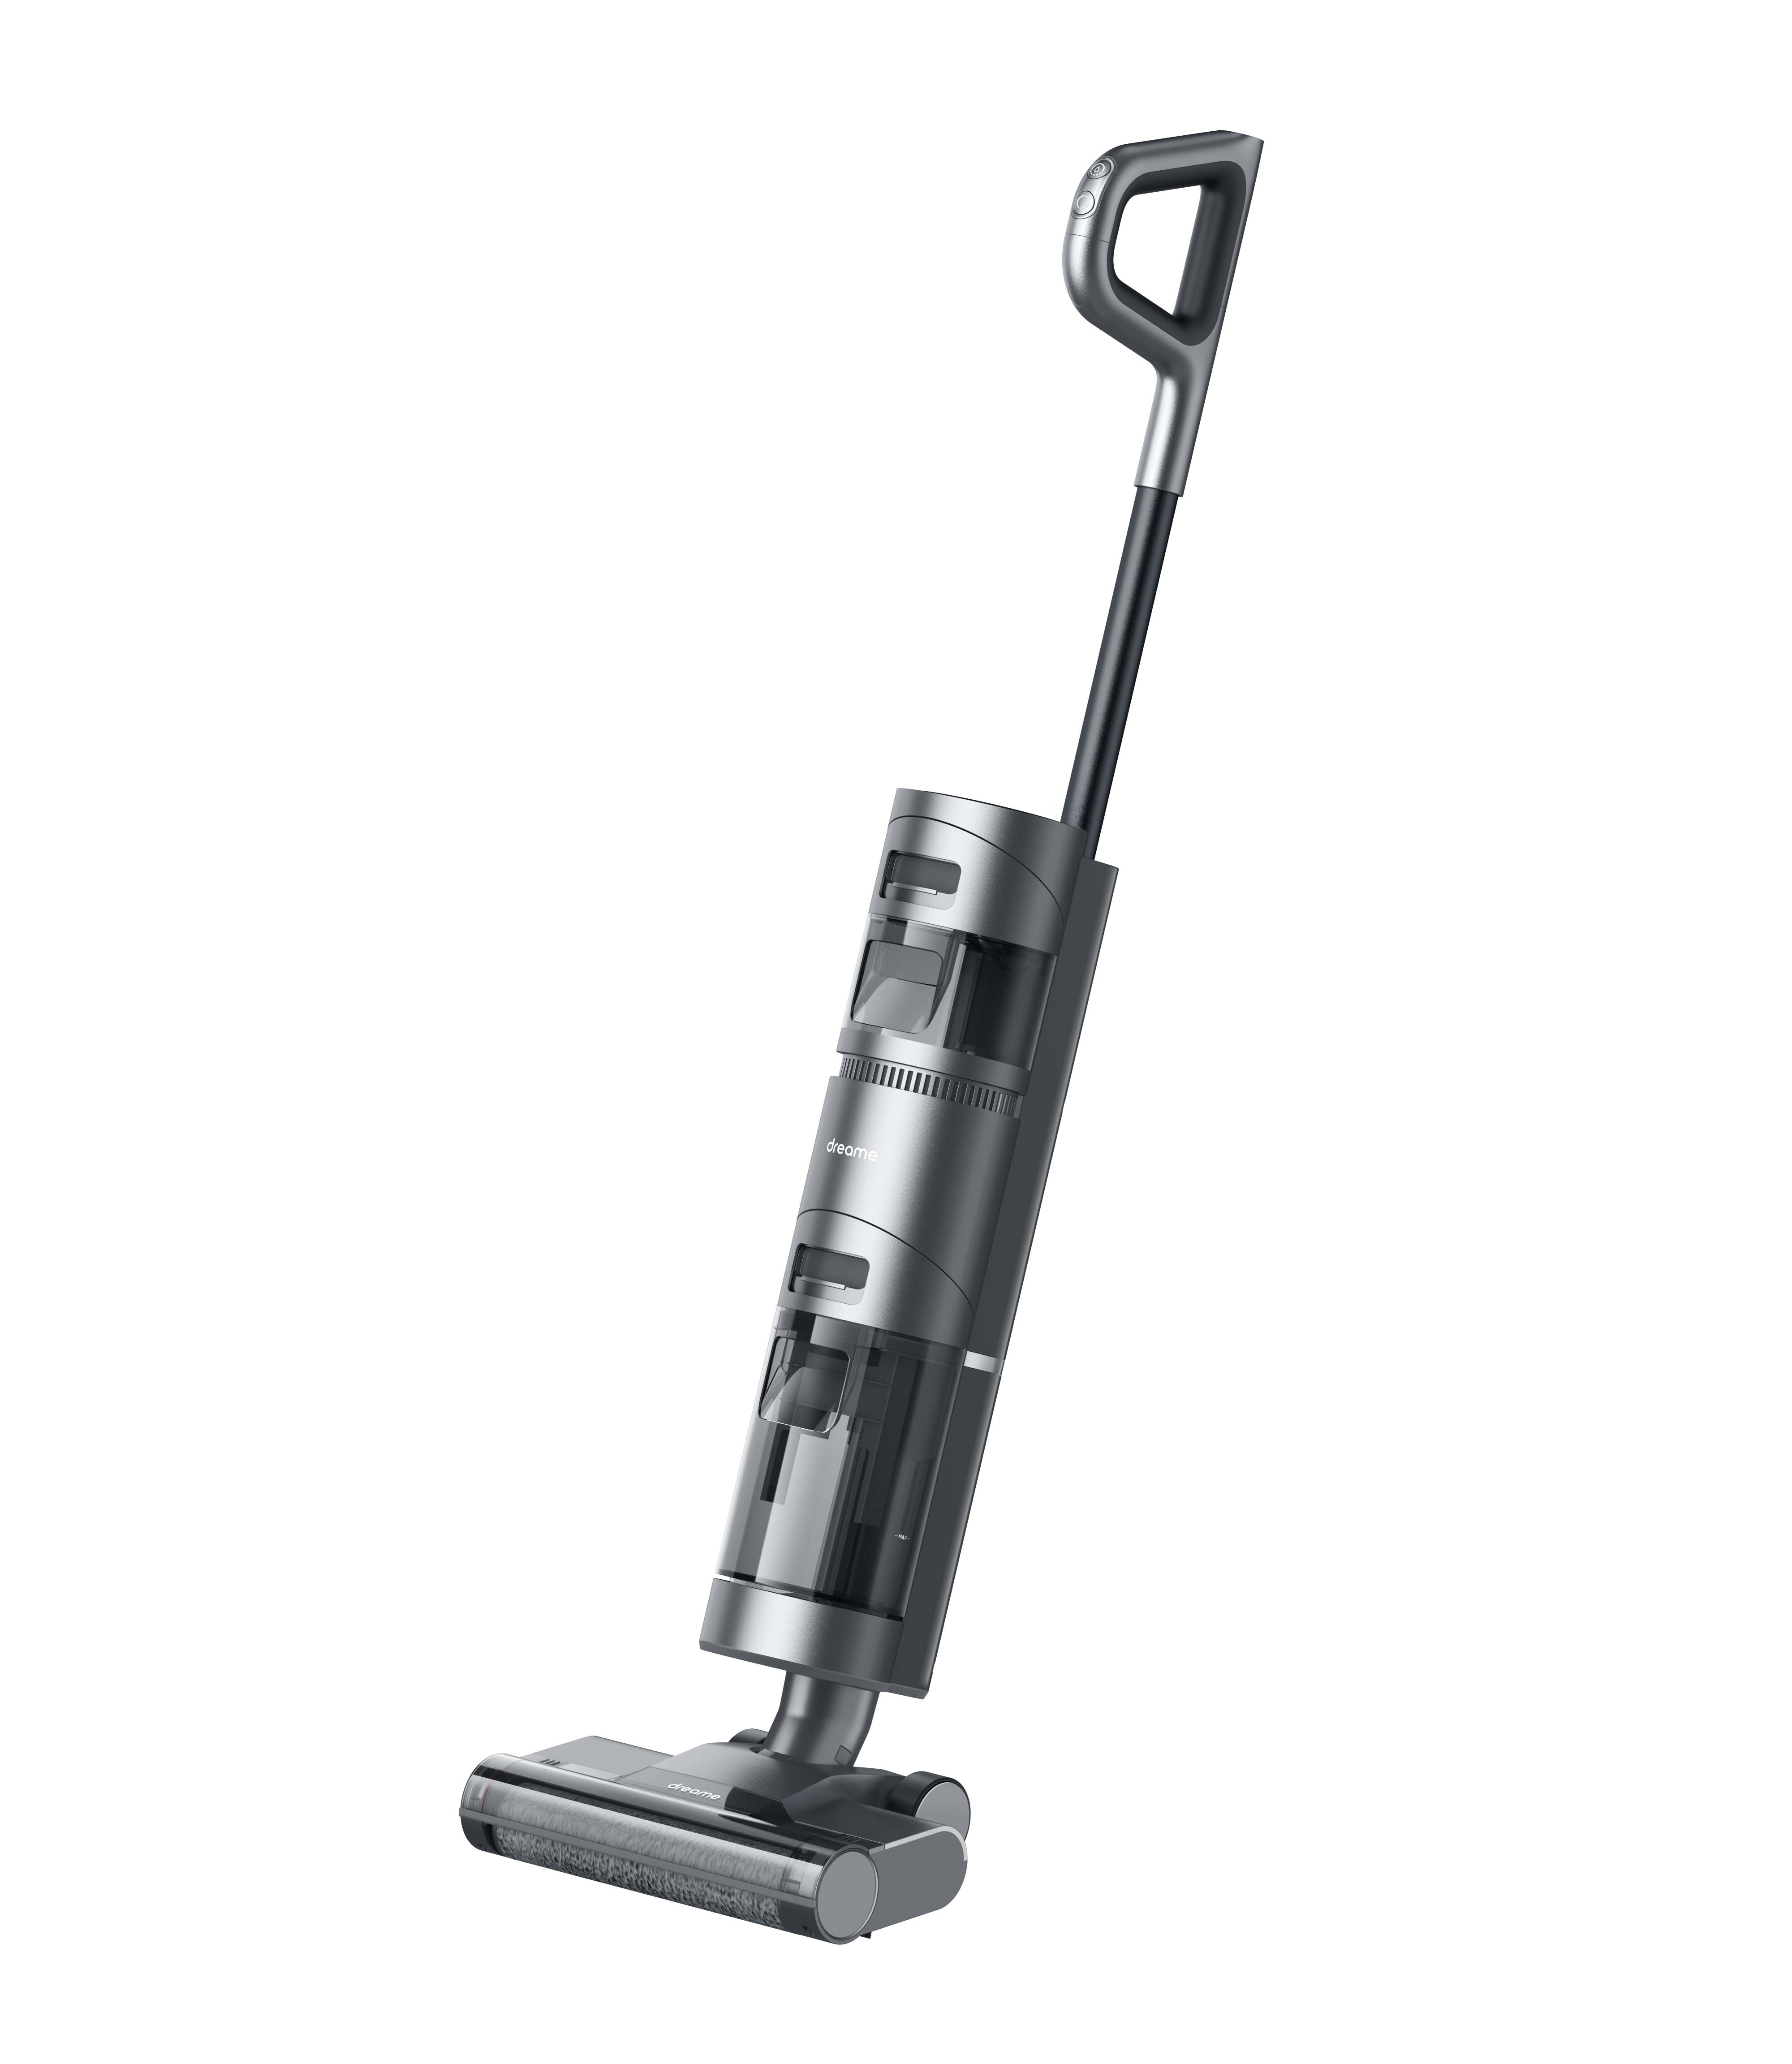 Dreame H11 Max Wet And Dry Vacuum, Vacuum & Mop & Wash 3 In 1 Cordless Self-cleaning Vacuum Cleaner